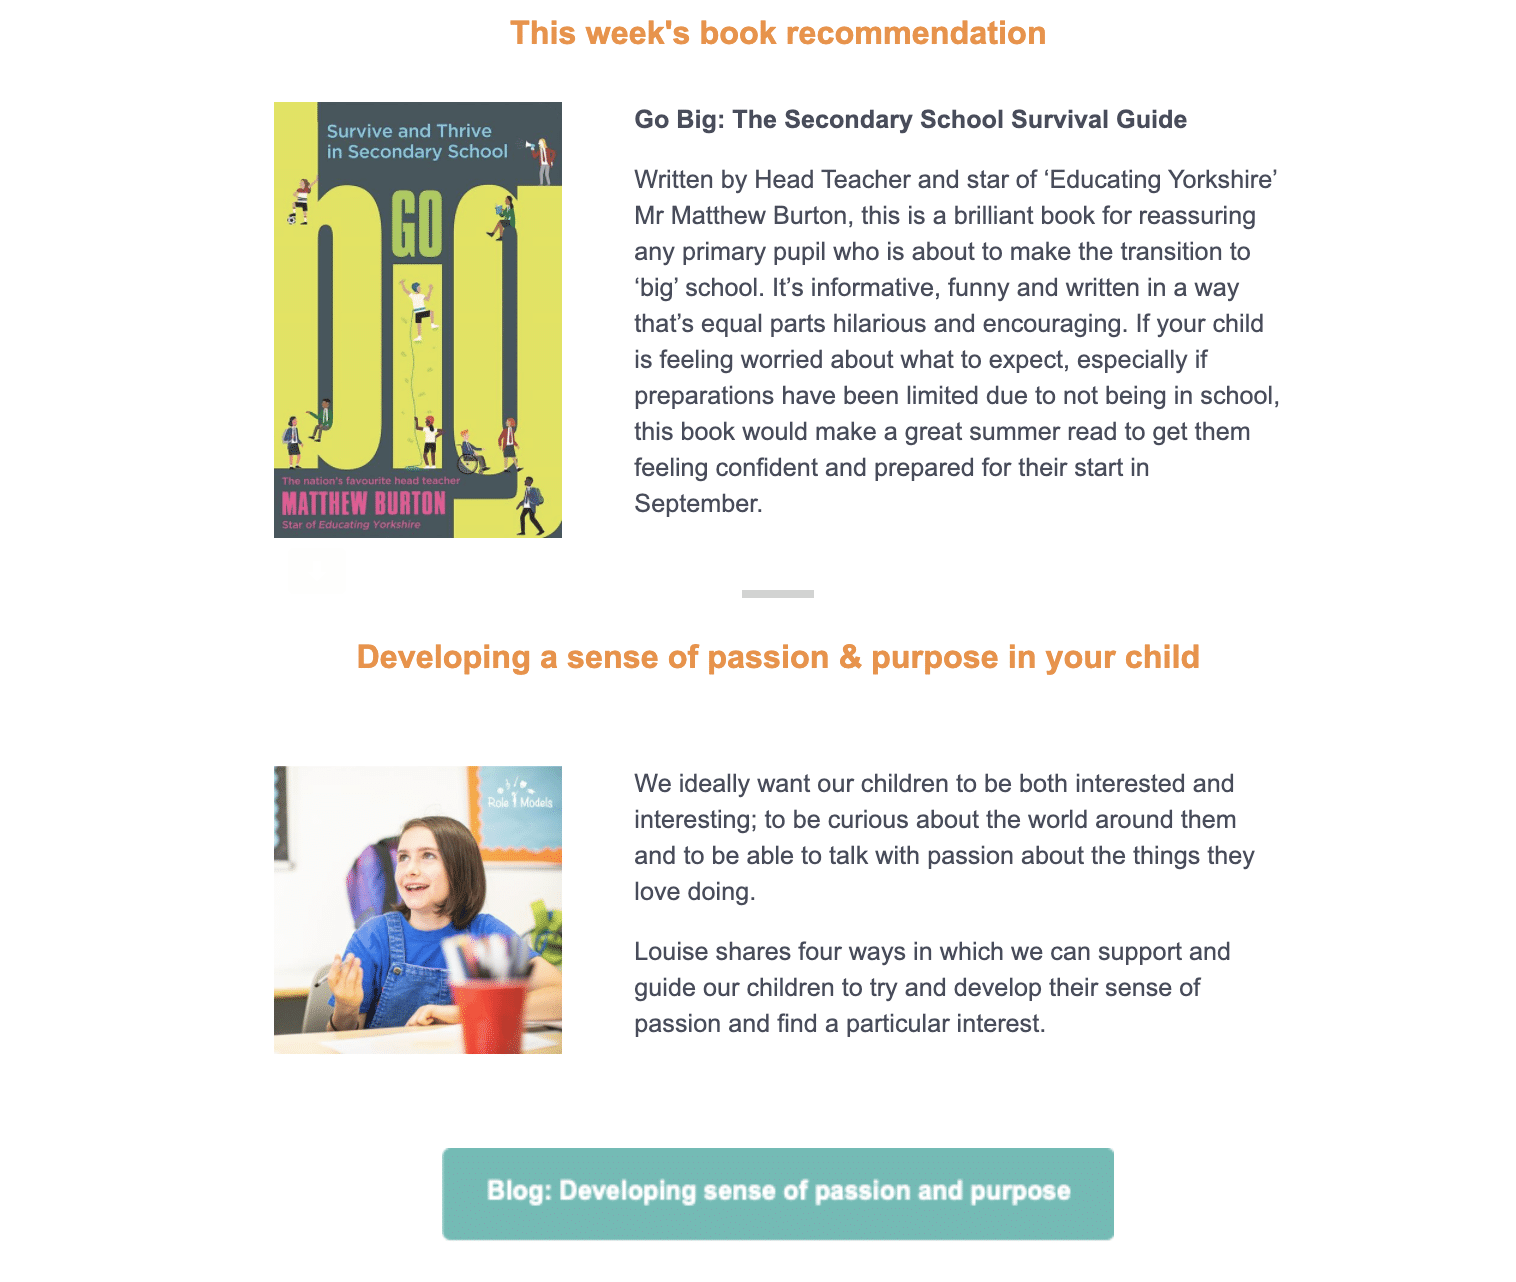 snippet from Role Model's emails, highlighting "This week's book recommendation" and "Developing a sense of passion and purpose in your child"